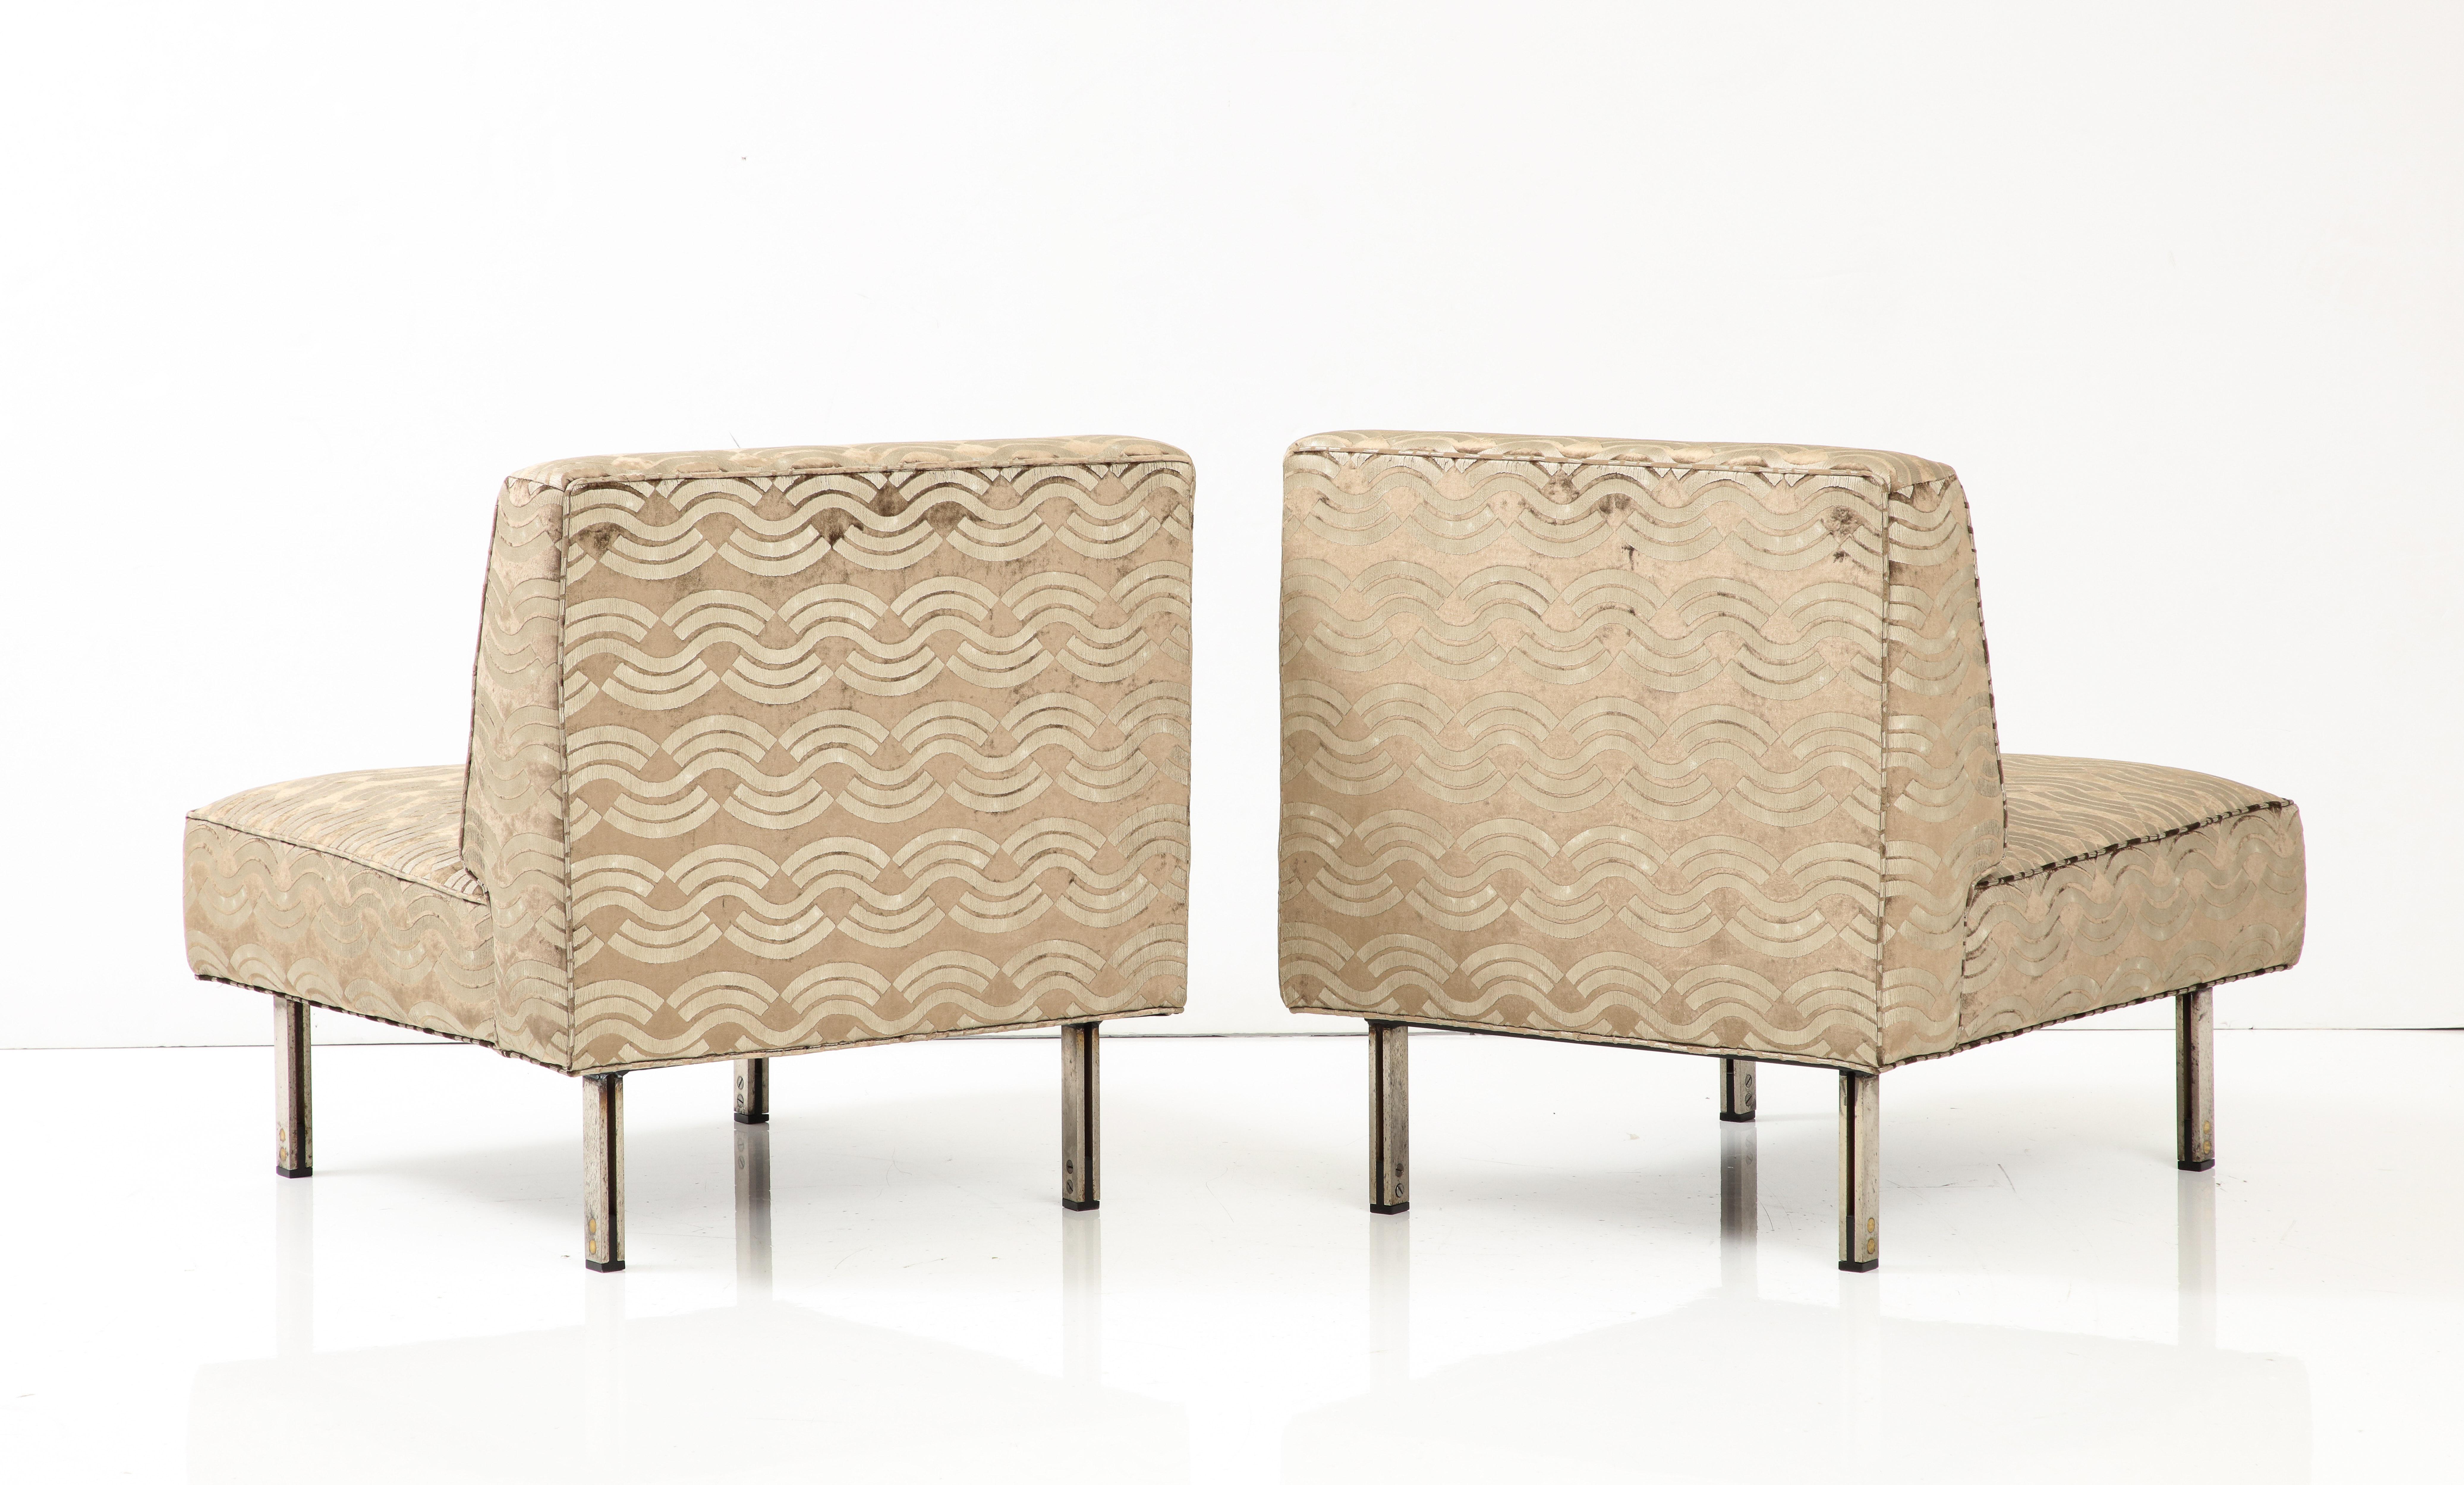 Mid-20th Century Ico Parisi 1960's Modernist Slipper Chairs In Donghia Velvet Fabric